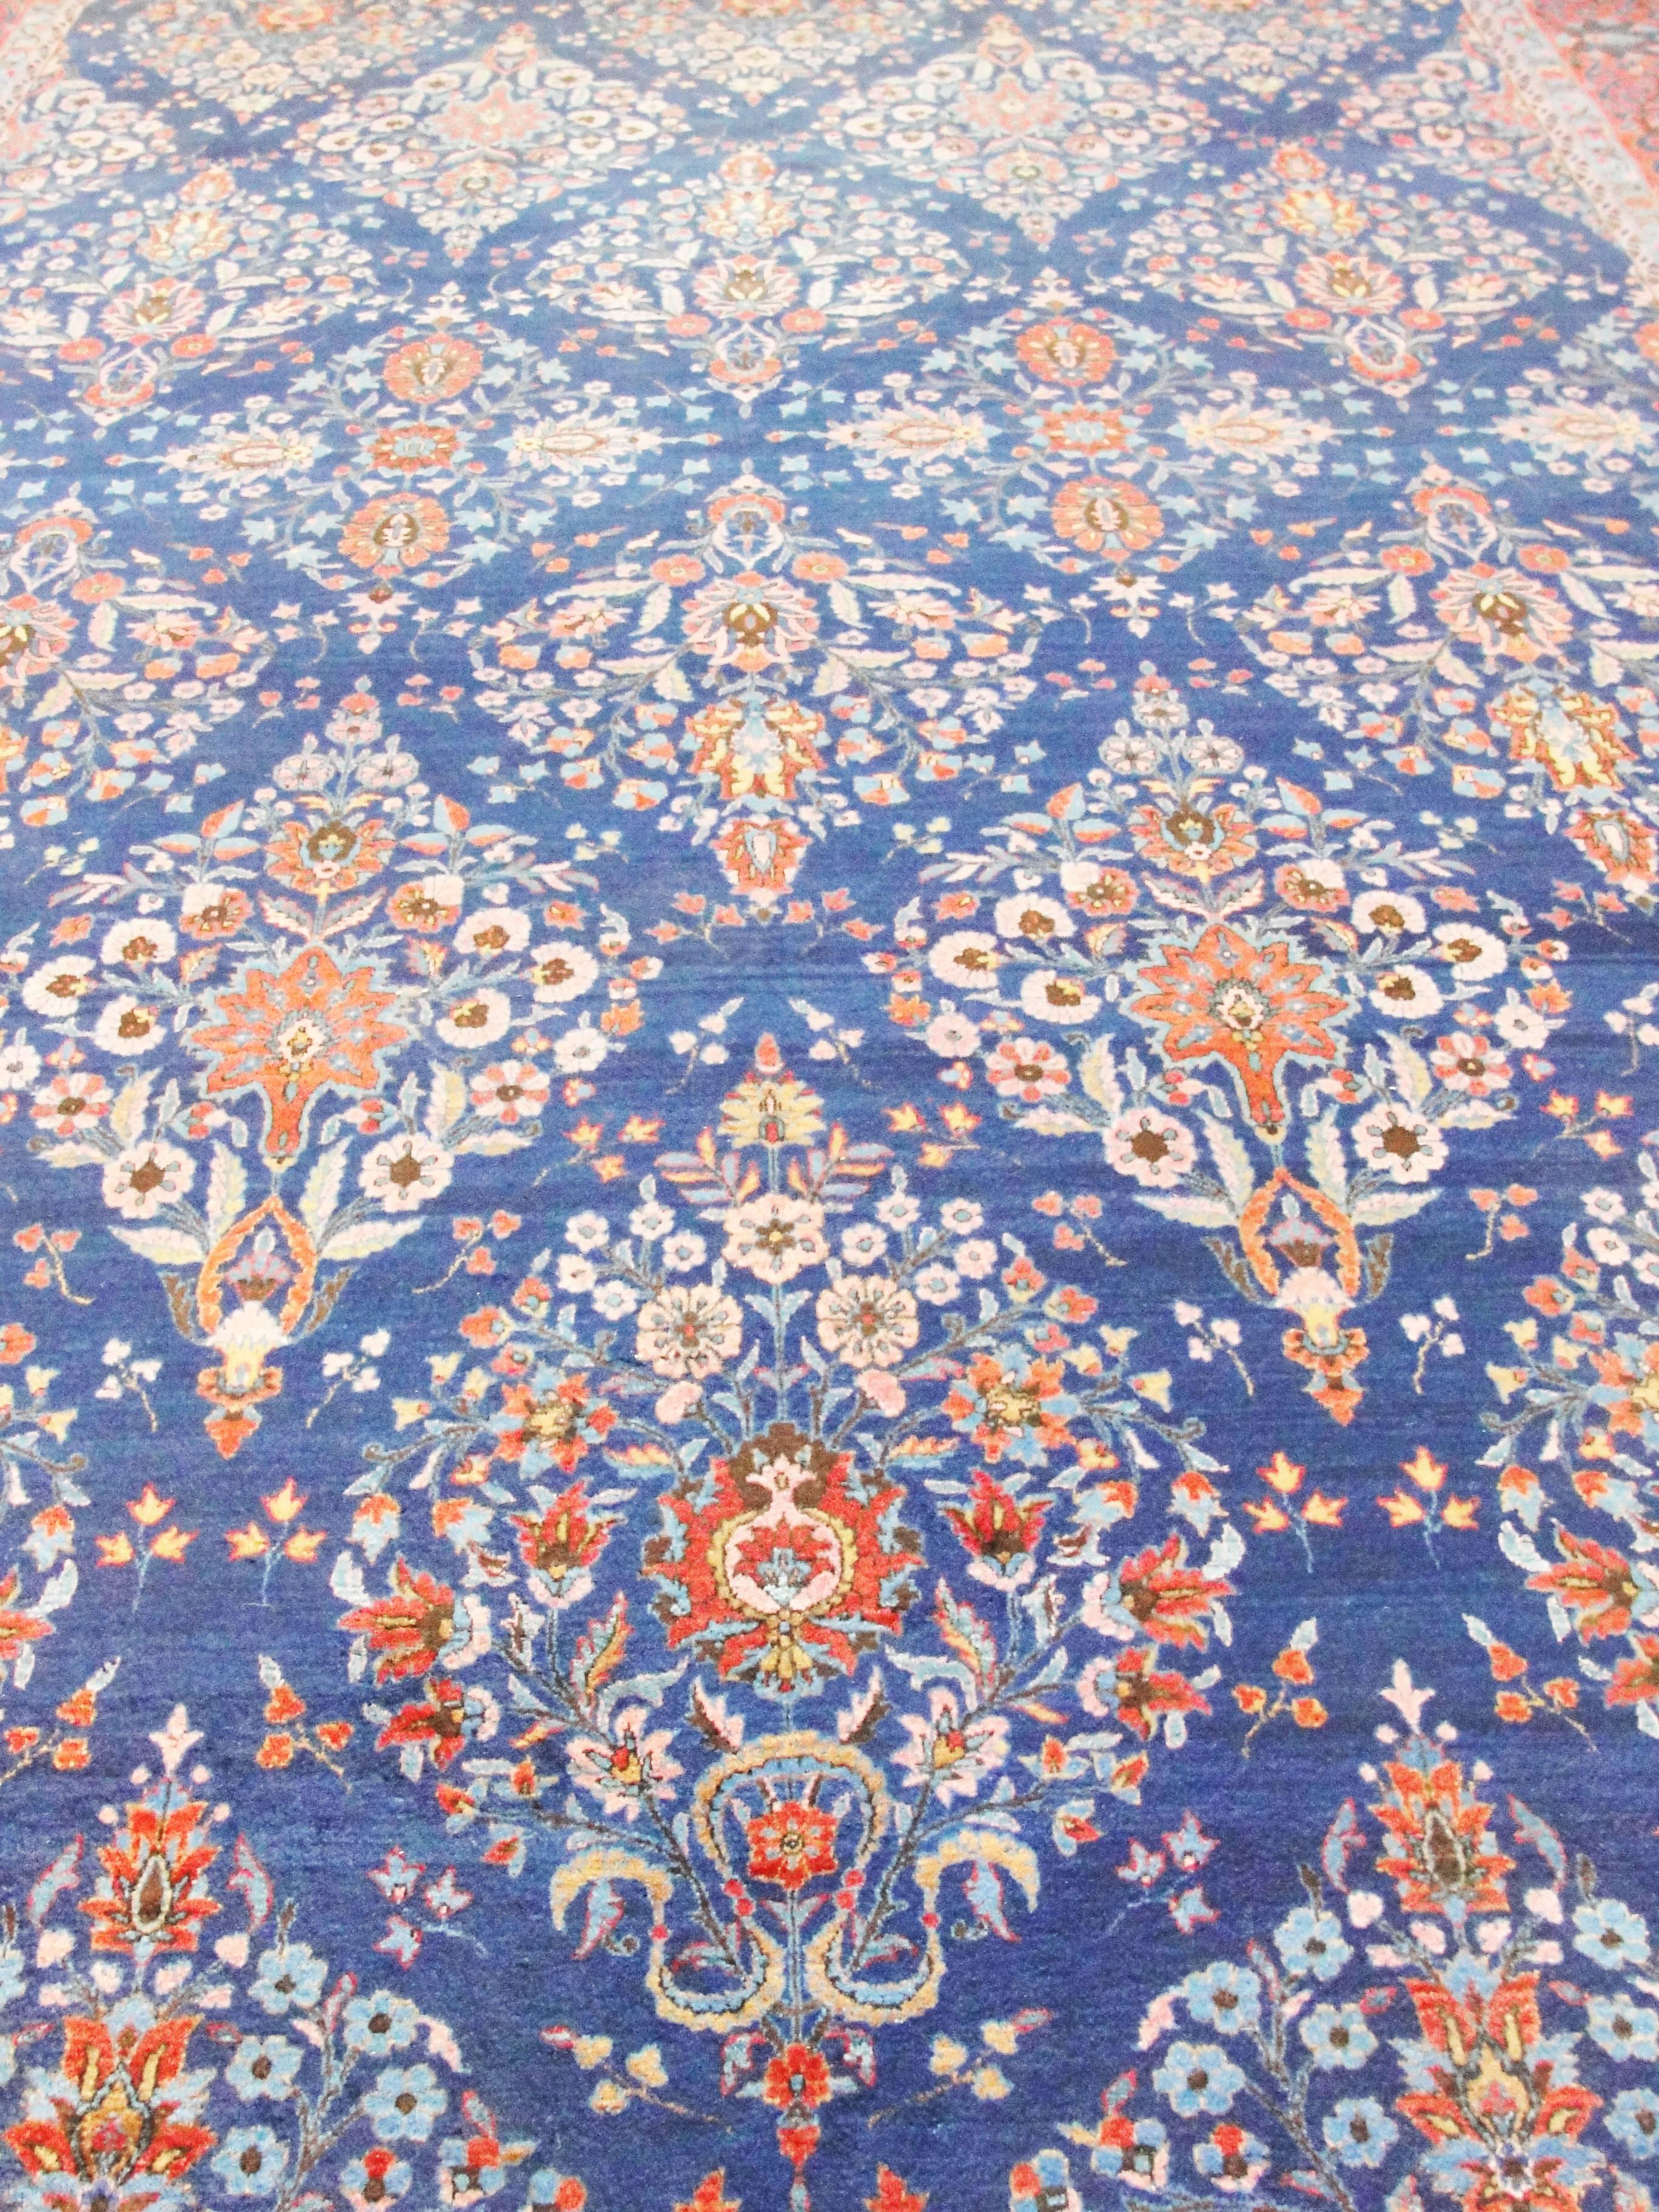 Antique Fine Persian Manchester Wool Kashan Carpet In Excellent Condition For Sale In Evanston, IL